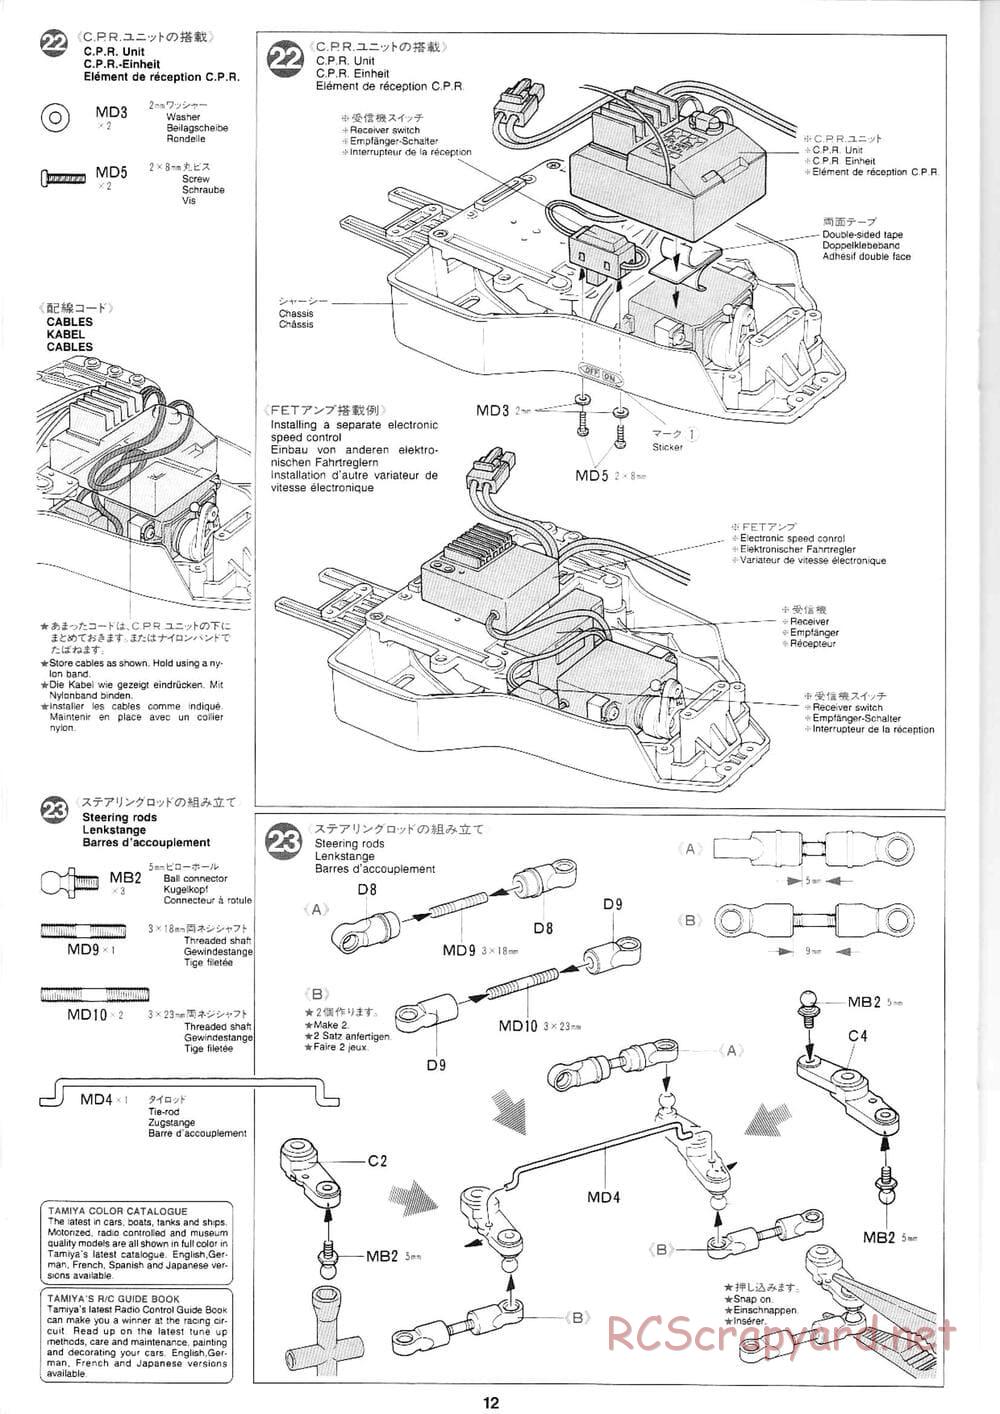 Tamiya - Volkswagen New Beetle - FF-01 Chassis - Manual - Page 10